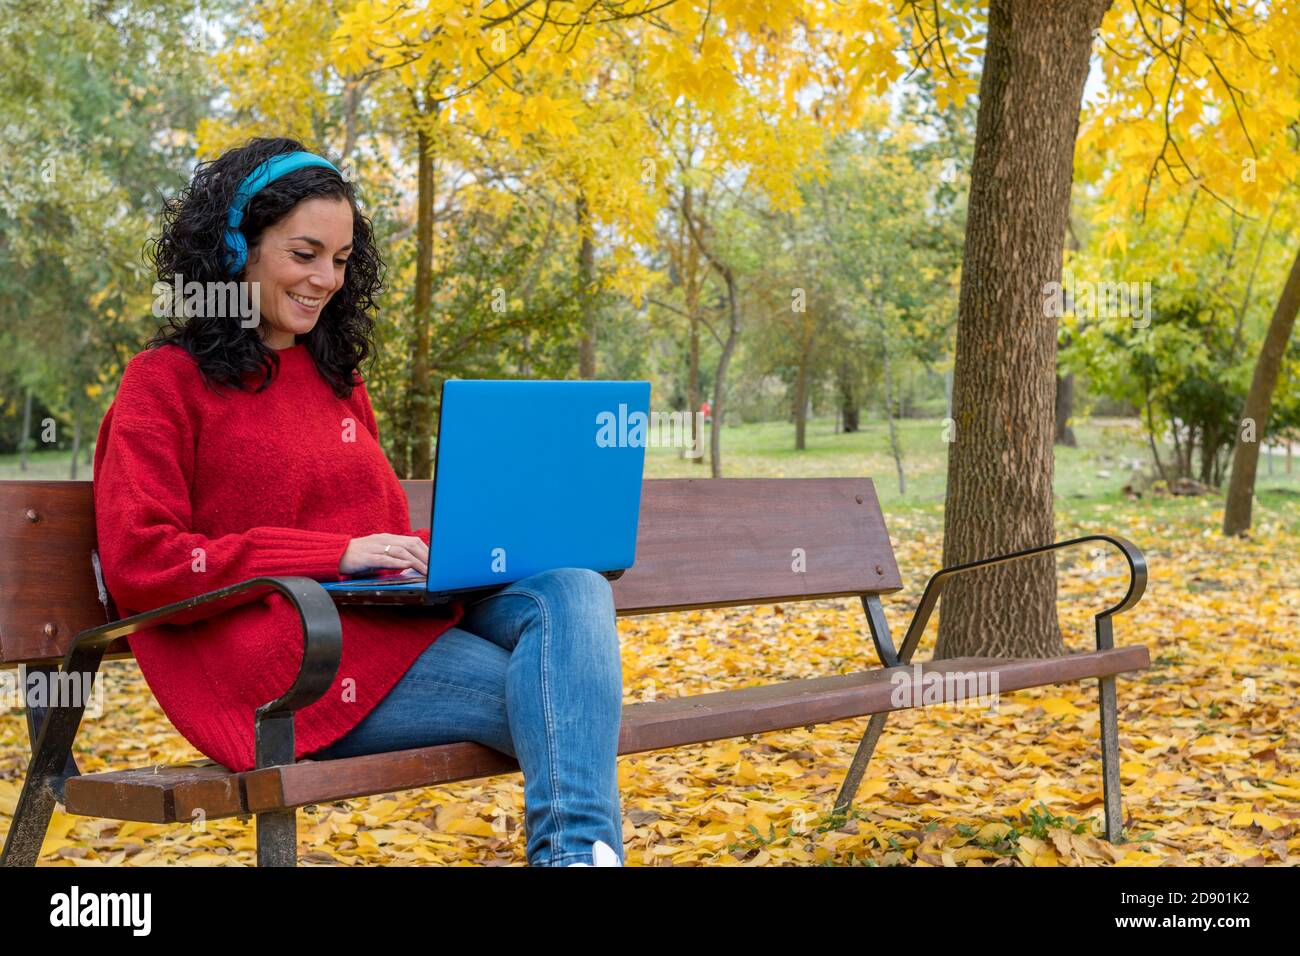 young woman with curly hair sitting on a bench working with laptop and blue wireless headphones in autumn with leaves falling from trees Stock Photo